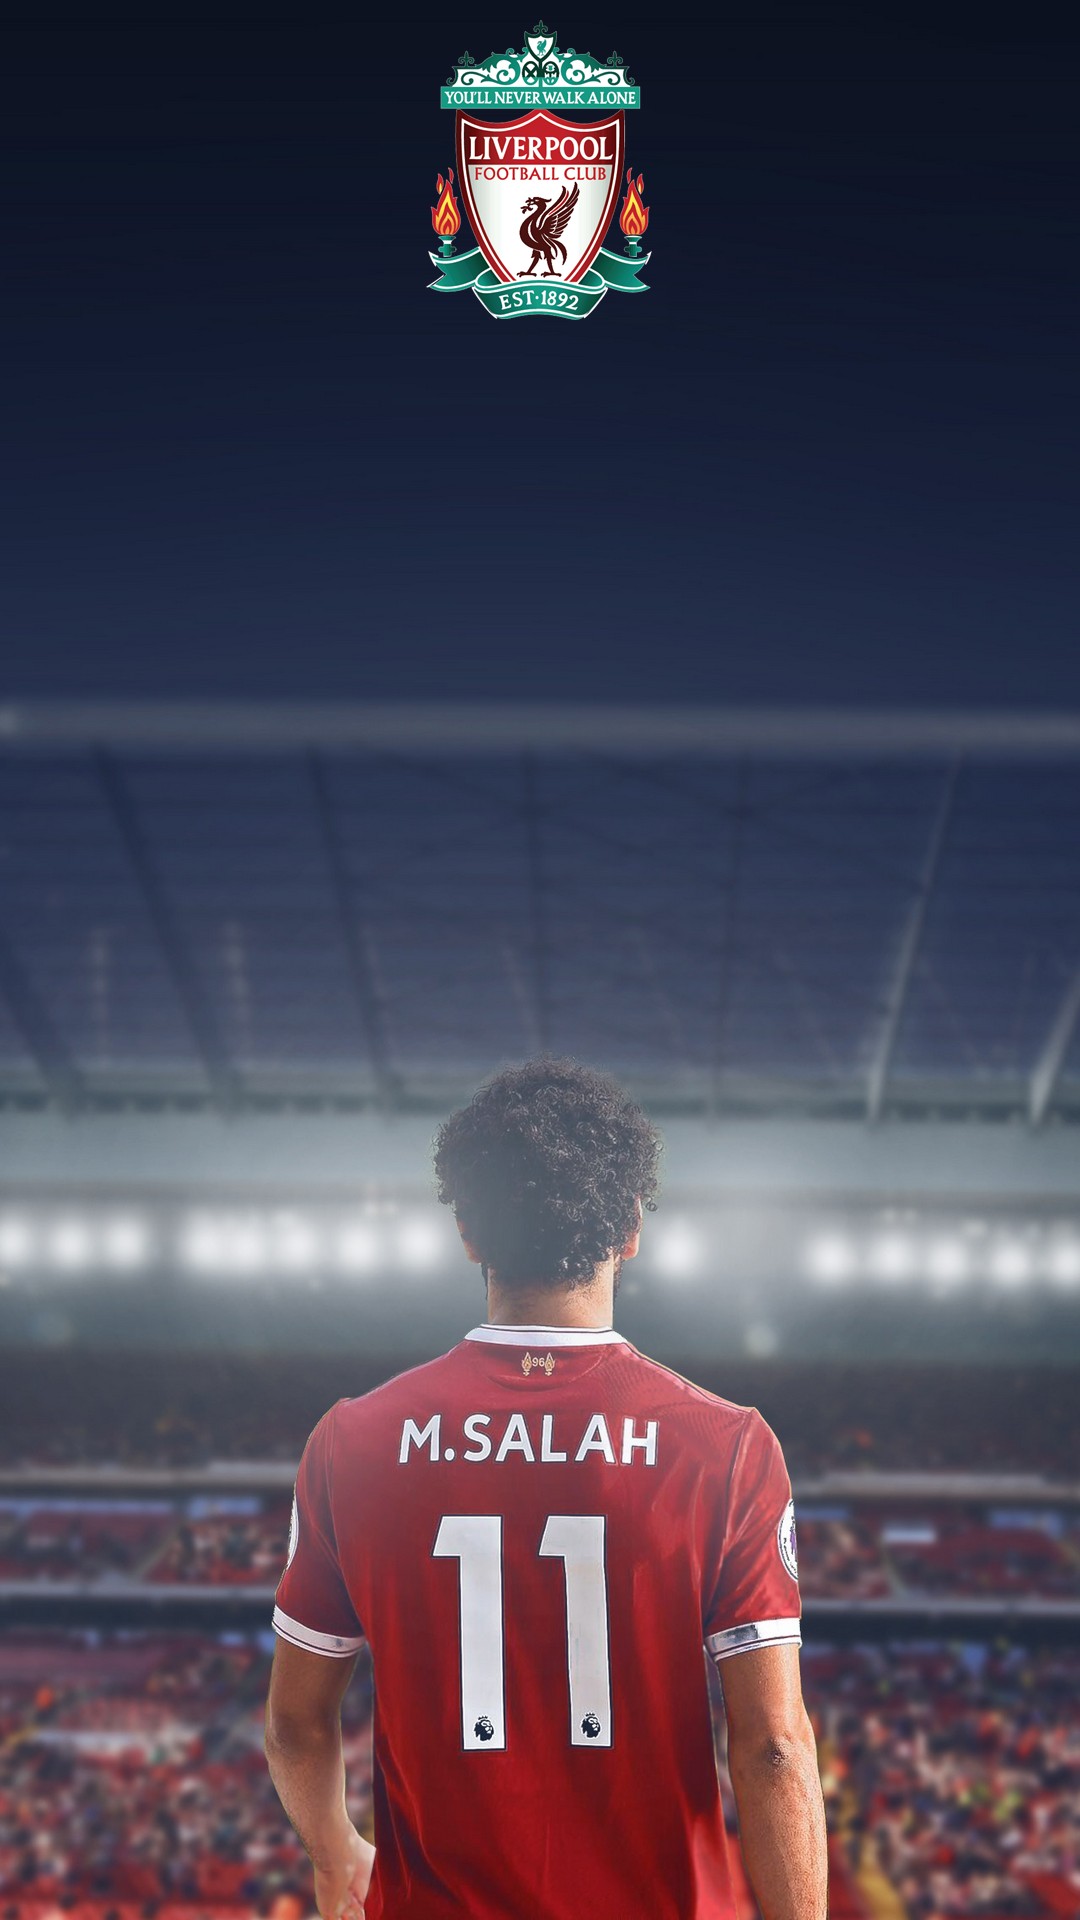 Wallpapers Phone Mohamed Salah with image resolution 1080x1920 pixel. You can make this wallpaper for your Android backgrounds, Tablet, Smartphones Screensavers and Mobile Phone Lock Screen